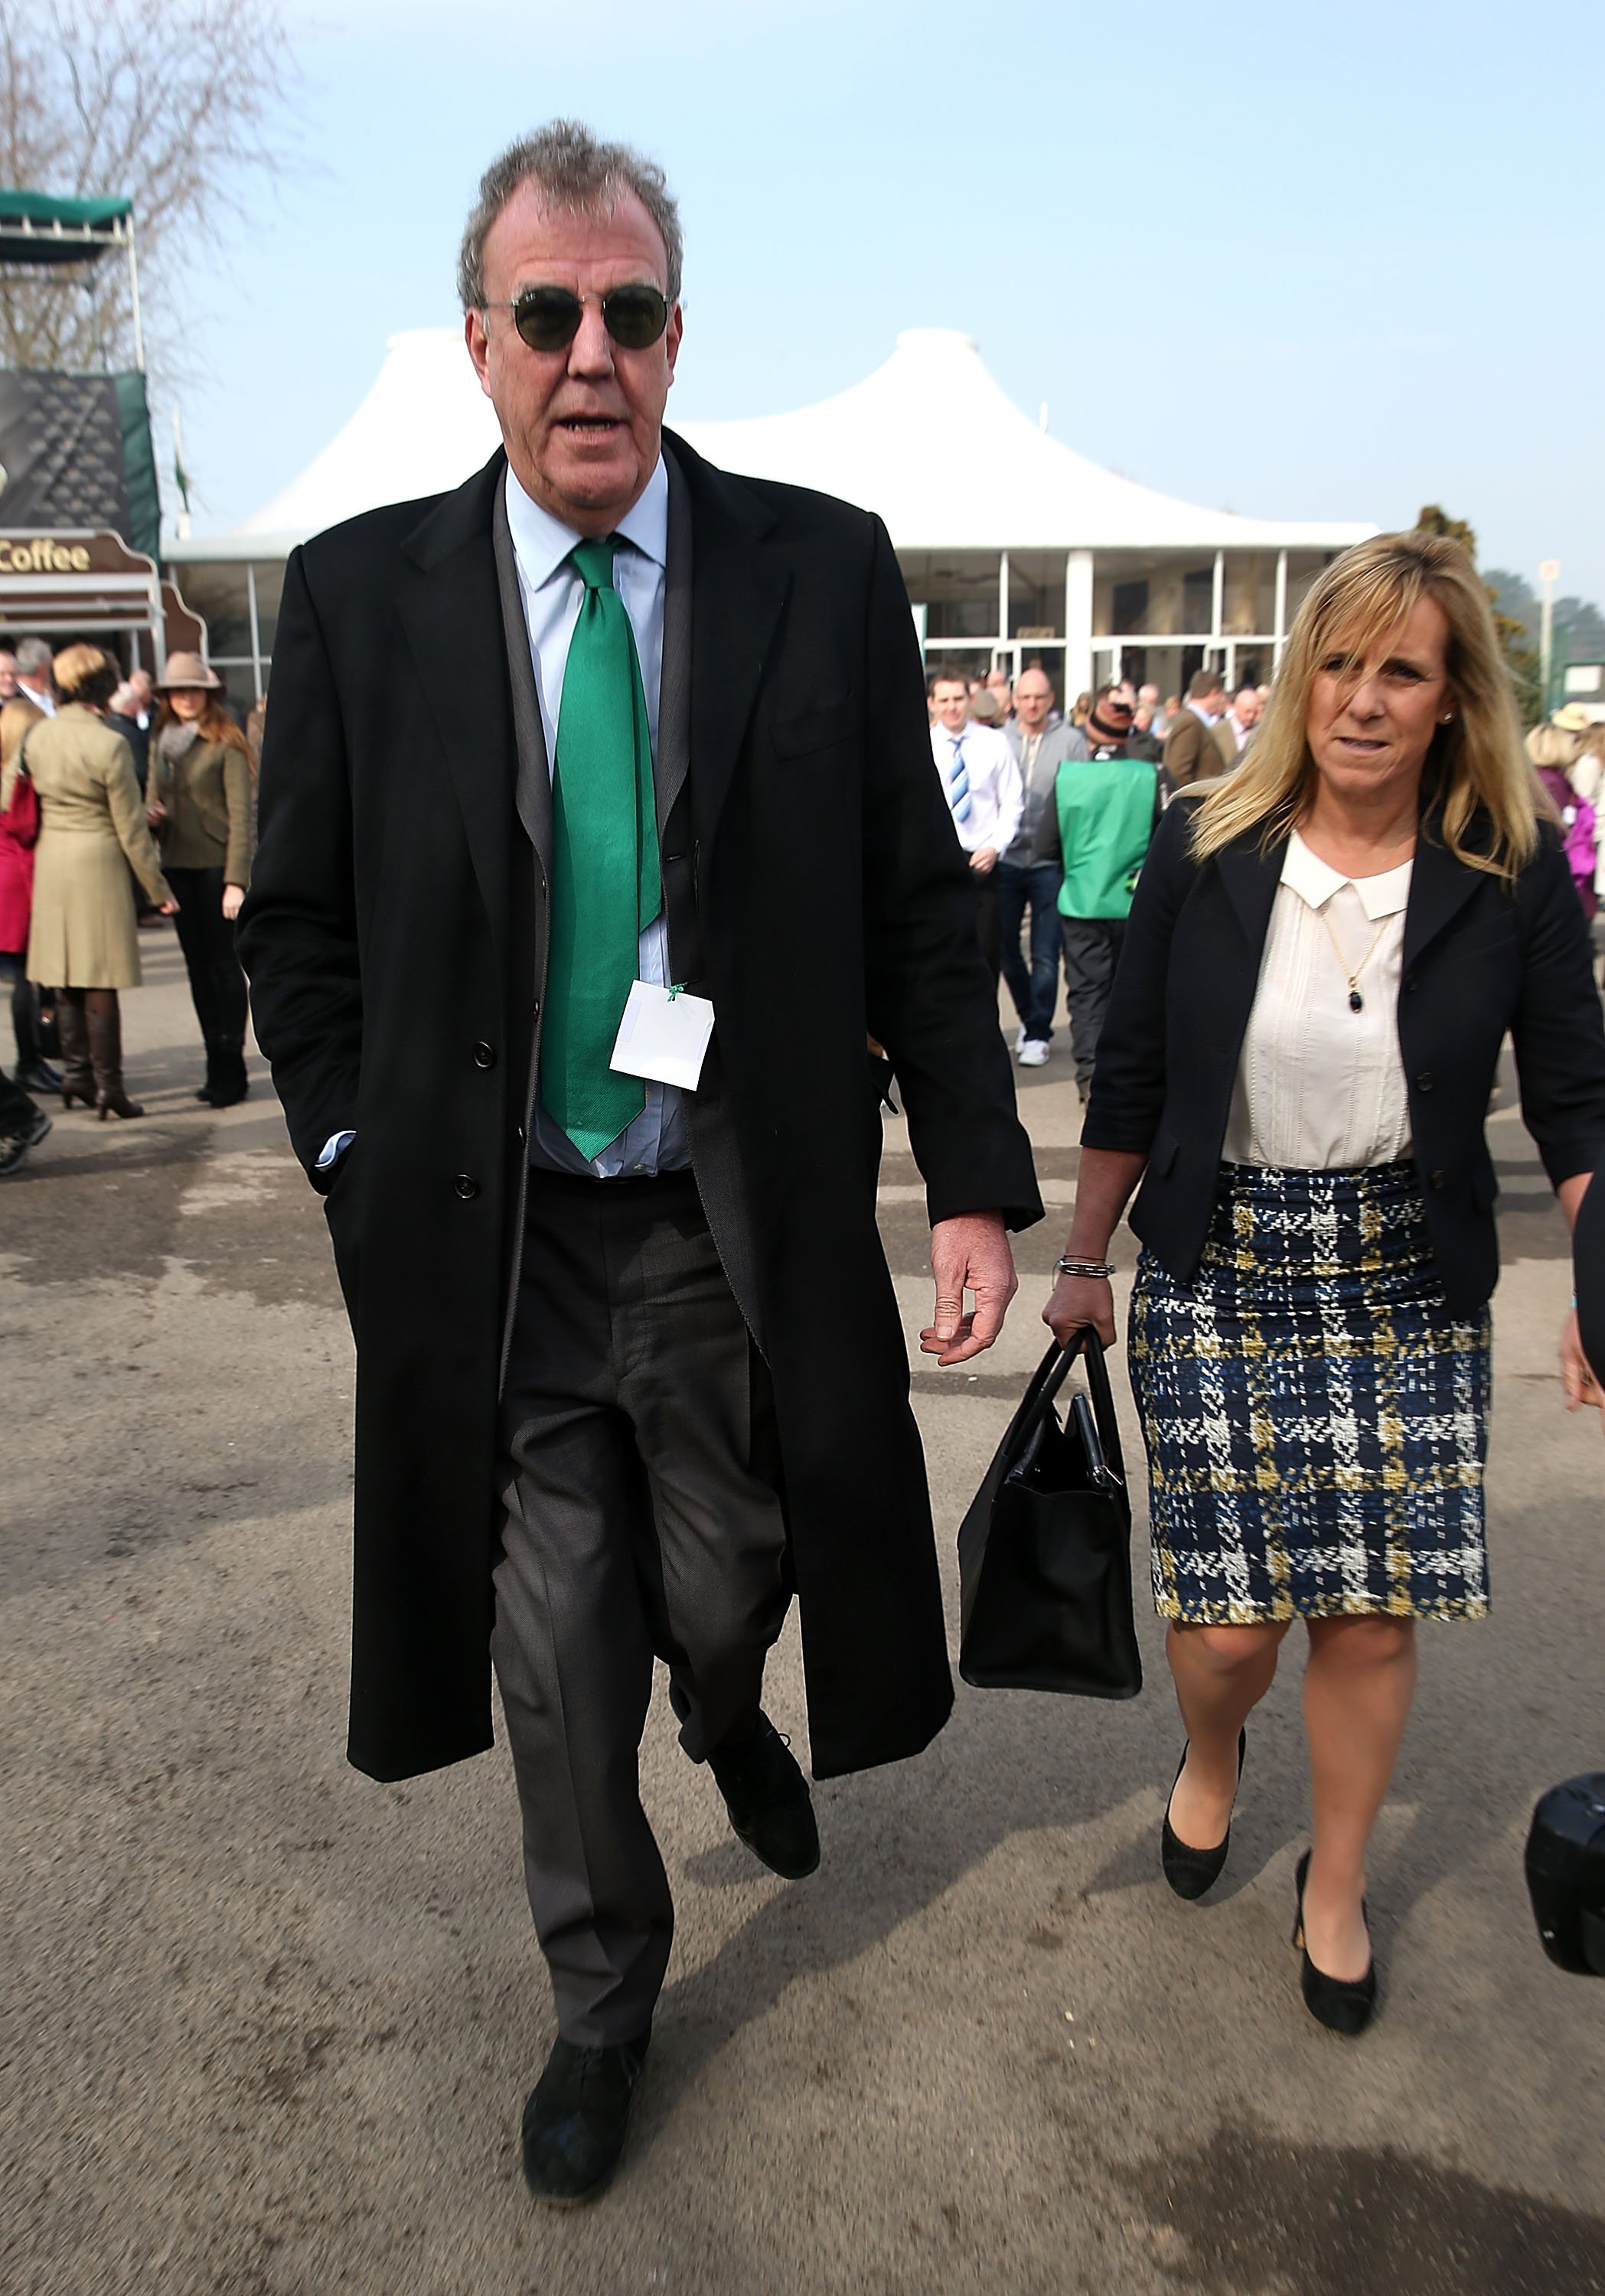 Jeremy Clarkson and Frances Cain are pictured on Day 4 of The Cheltenham Festival at Cheltenham Racecourse on March 14, 2014, in Cheltenham, England | Source: Getty Images